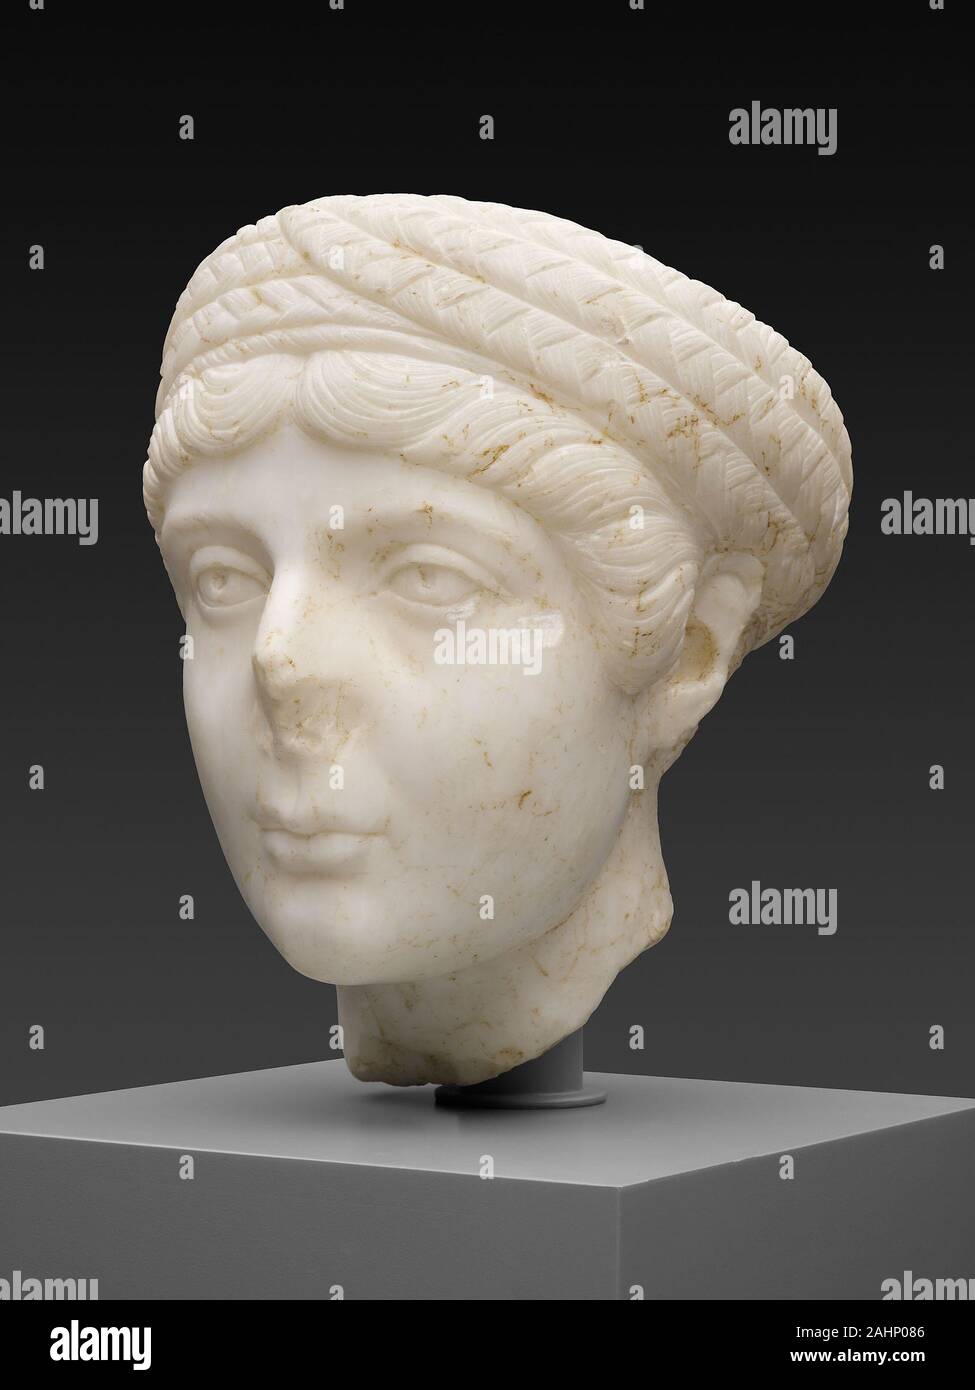 and roman of images young - stock Page hi-res 4 Head - a Alamy photography